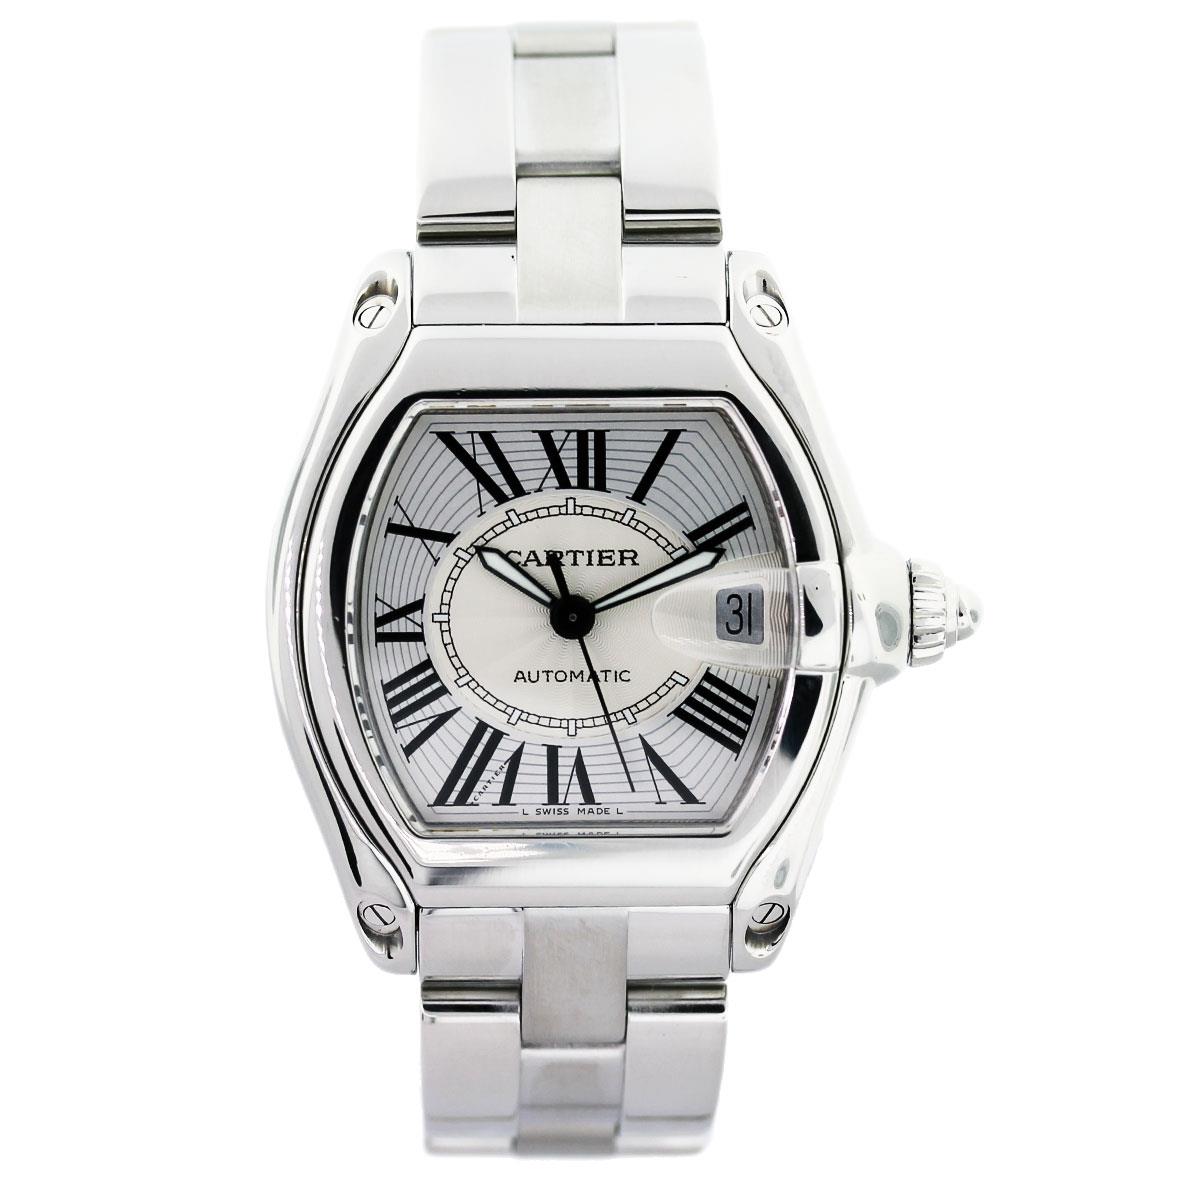 Cartier Roadster watch, pictures, reviews, watch prices